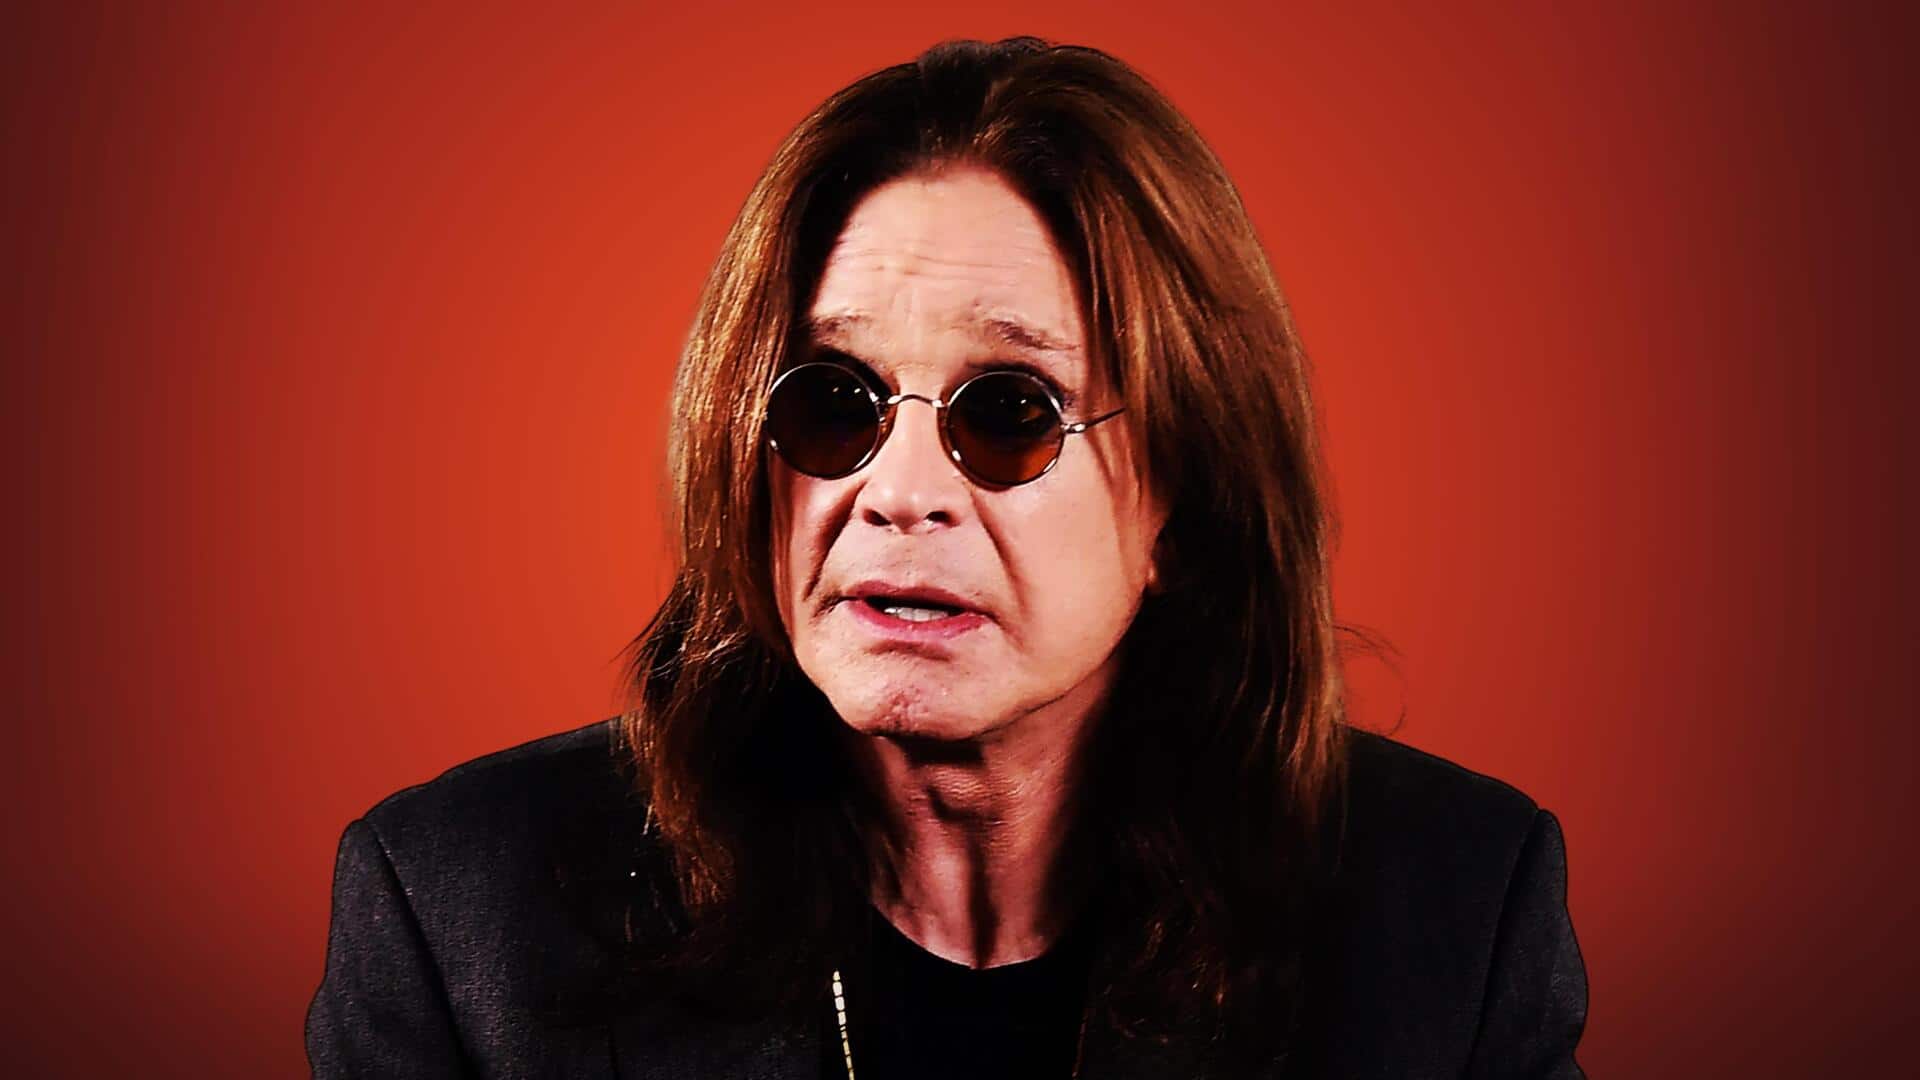 Spine injury to Parkinson's disease: All about Ozzy Osbourne's health 